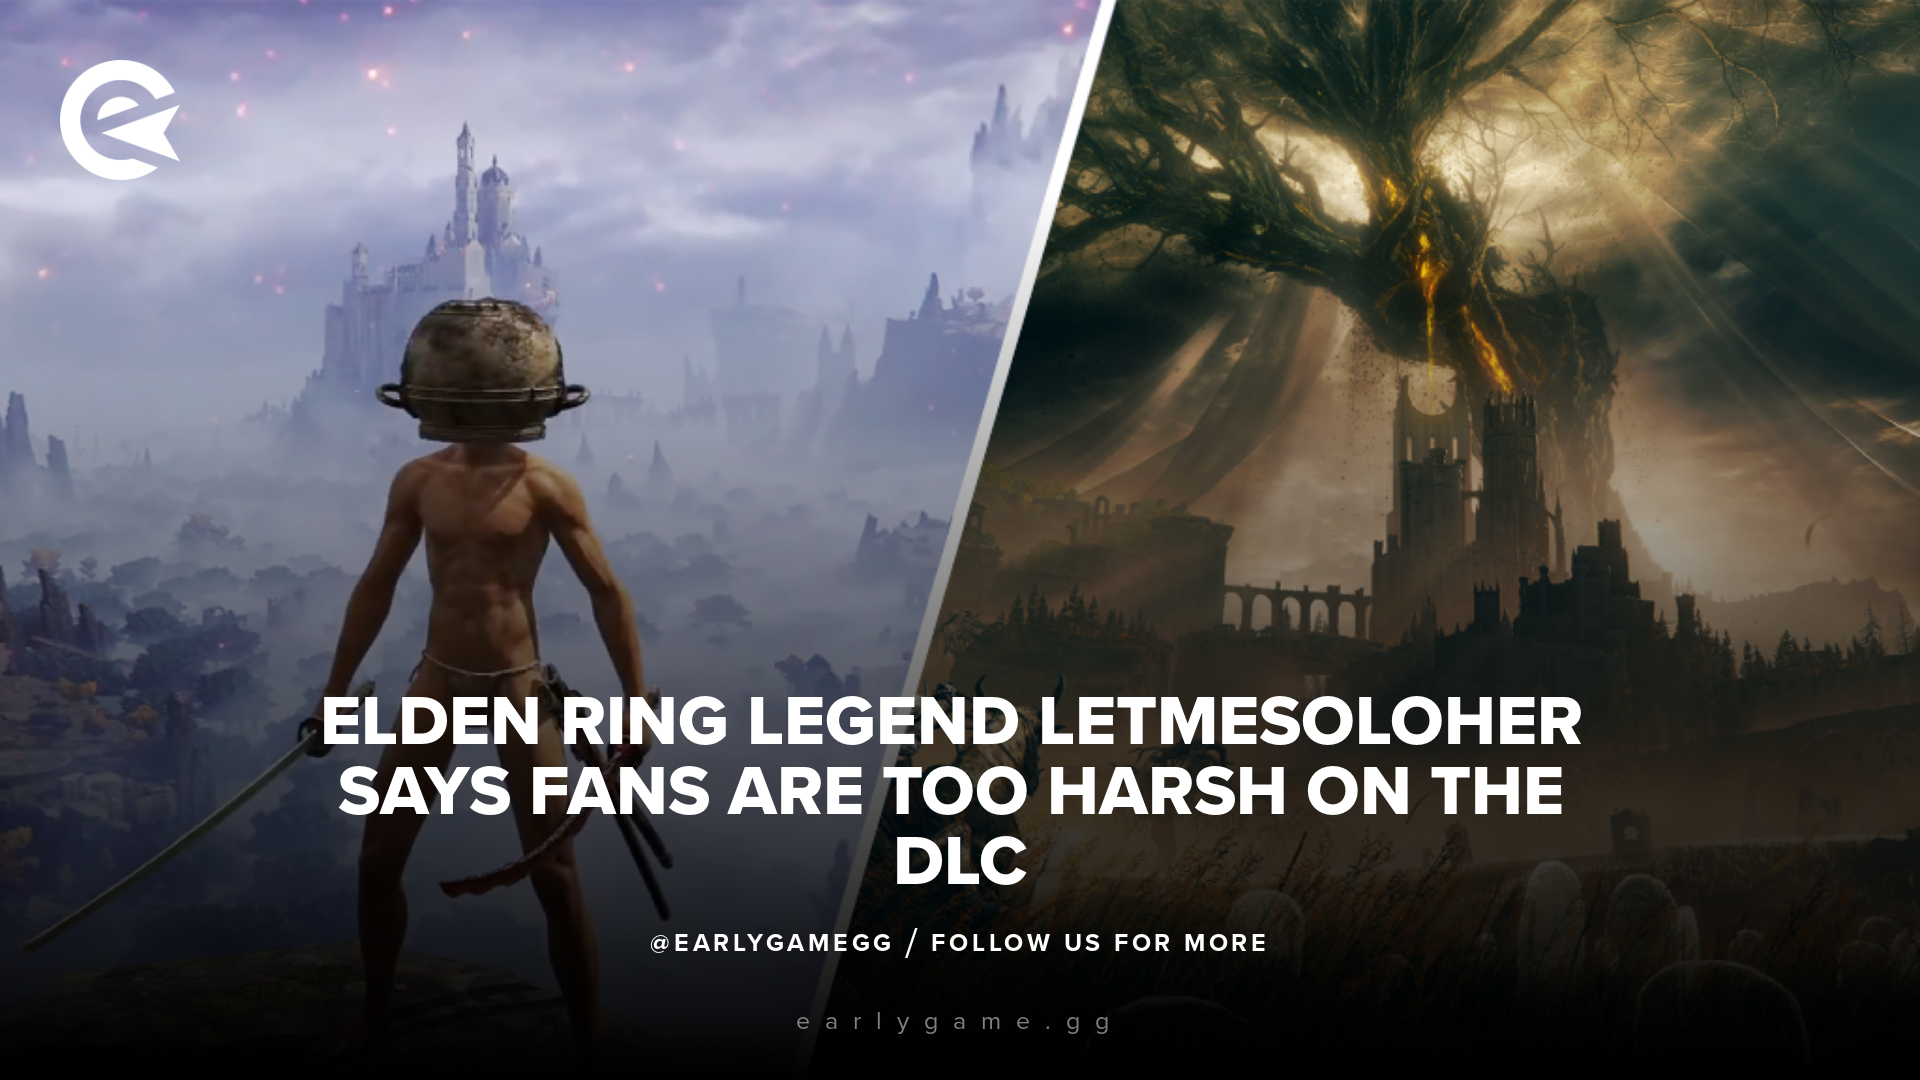 Elden Ring Legend Let Me Solo Her Says Fans Are Too Harsh On The DLC